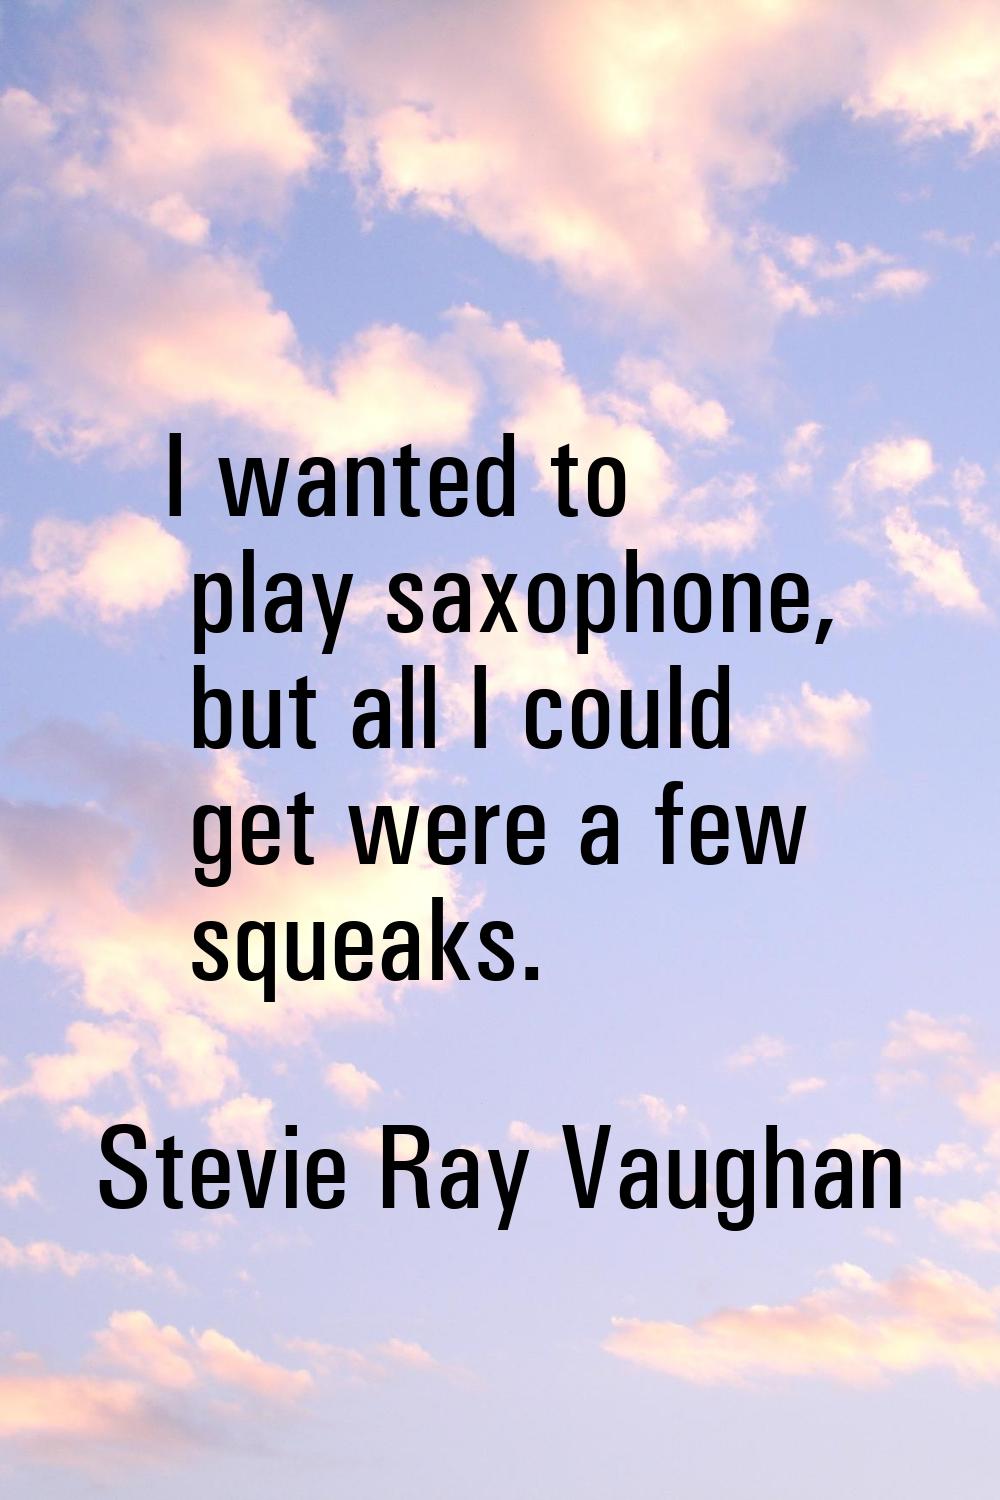 I wanted to play saxophone, but all I could get were a few squeaks.